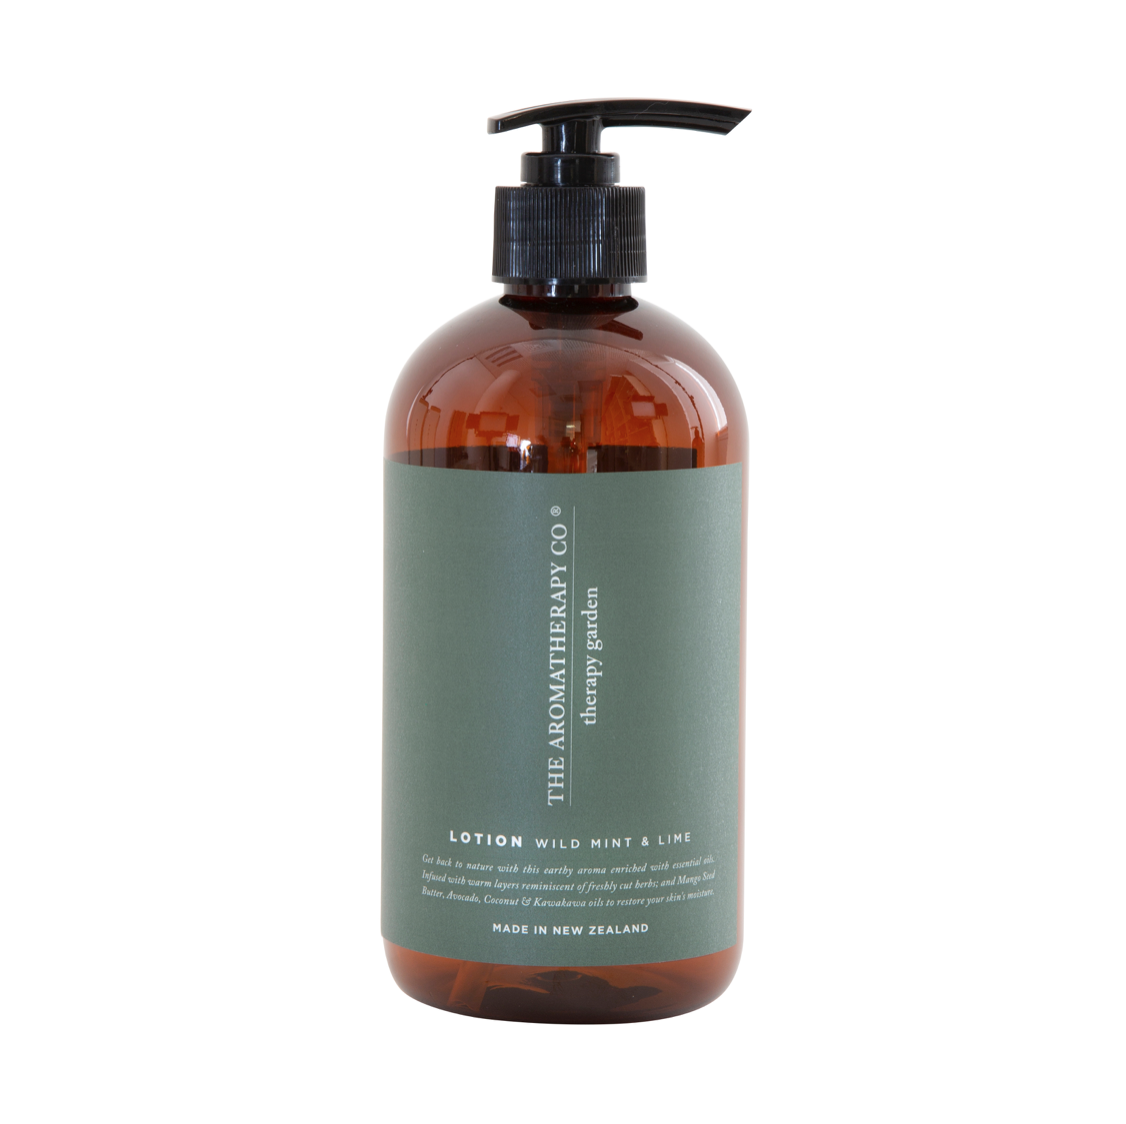 THERAPY GARDEN HAND & BODY LOTION - WILD MINT & LIME